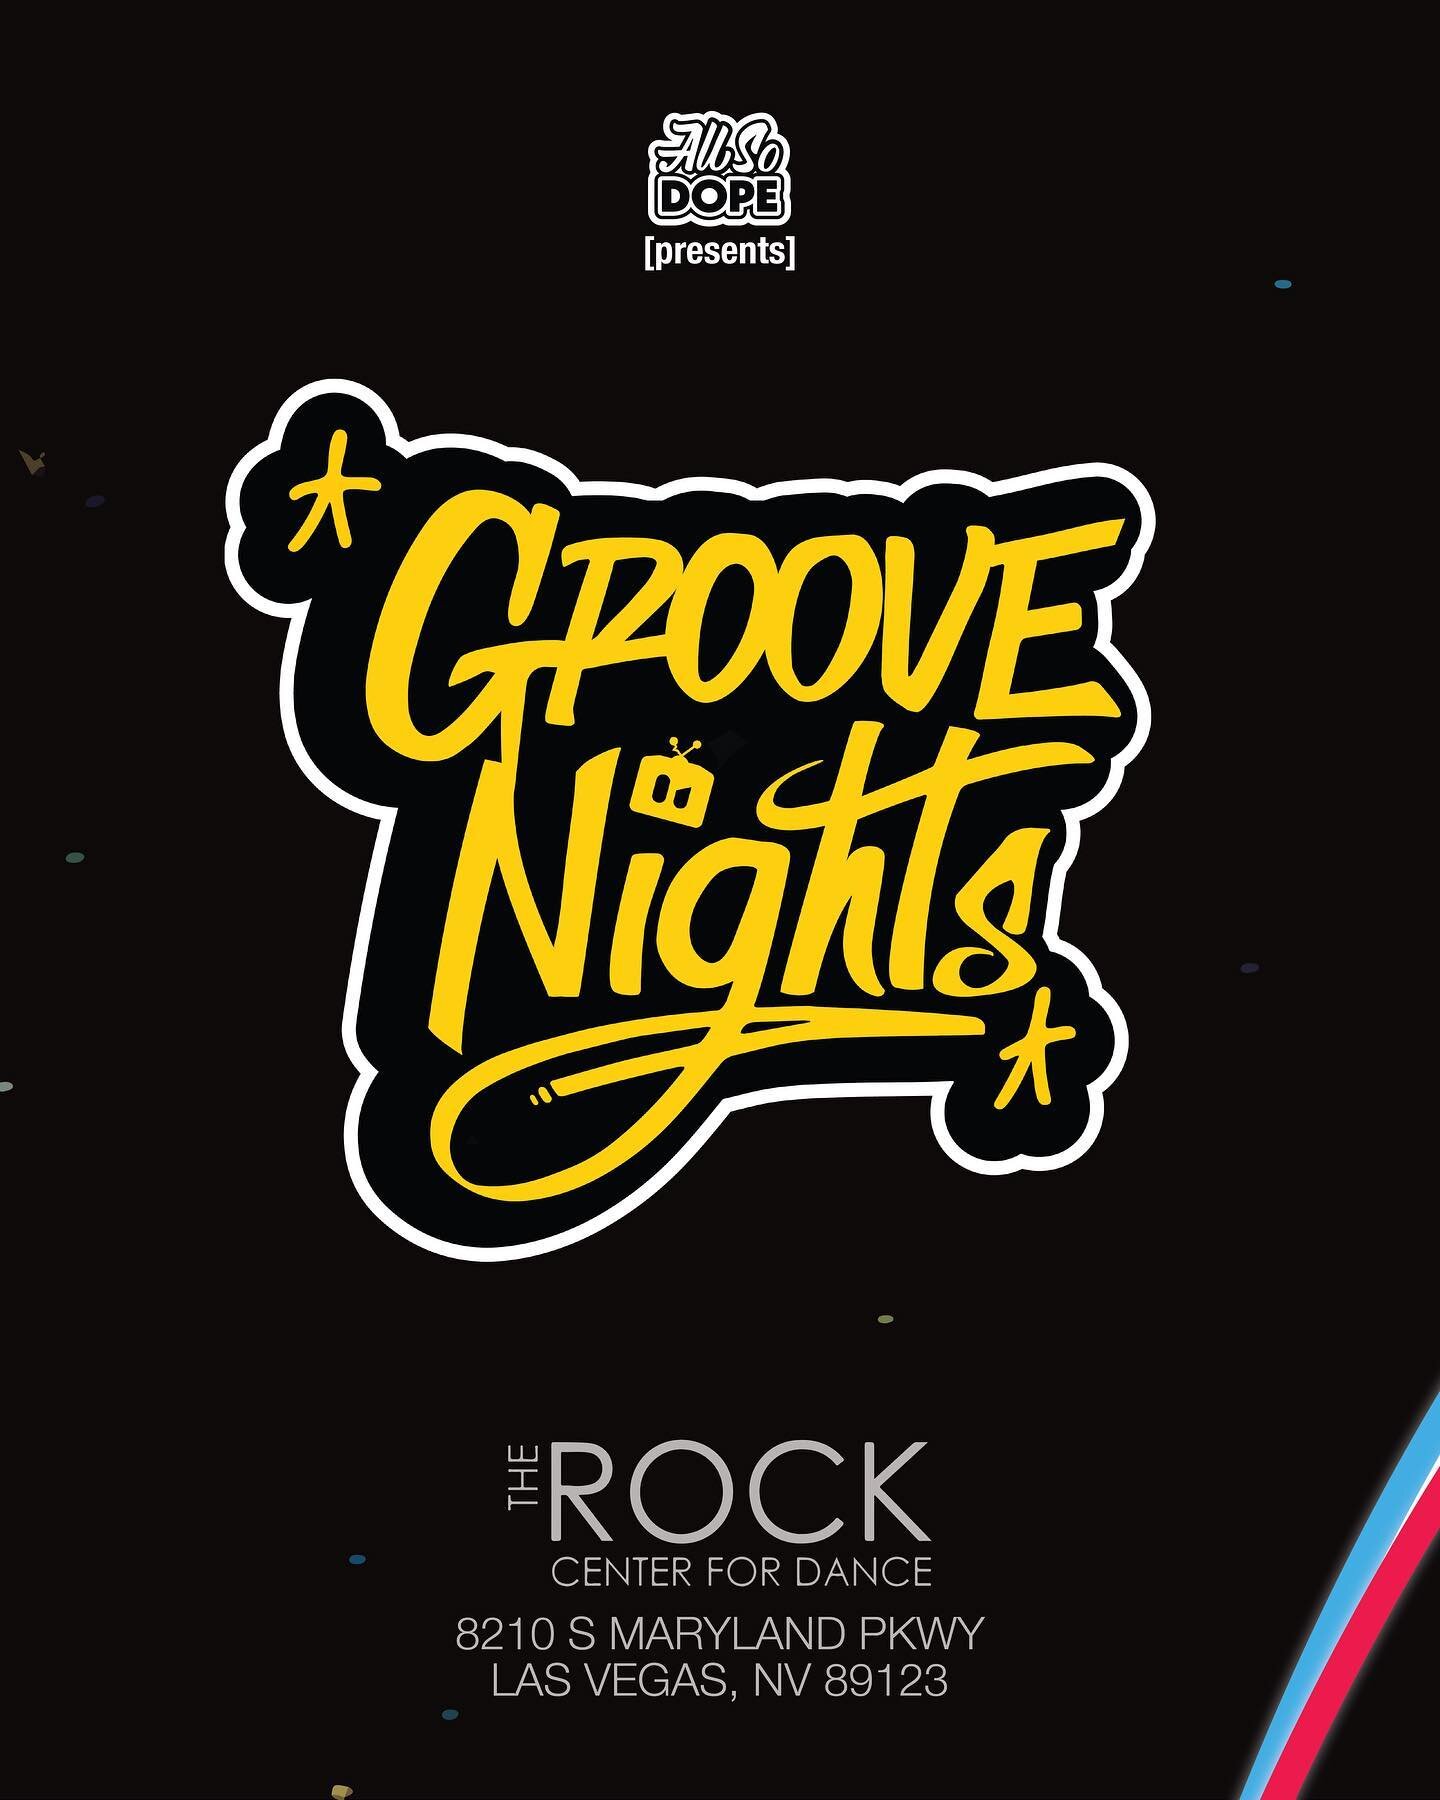 REGISTRATION IS NOW OPEN!
[Link in Bio]
www.allsodope.com/events

All So DOPE presents: Groove Nights
11.04.22
8:30 PM-10:30 PM
@therockcenterfordance

OUR SPONSORS:
@thedopeshow.crew
@swarmbrand 
@versatilepartylv

Interested in sponsoring?
info@all